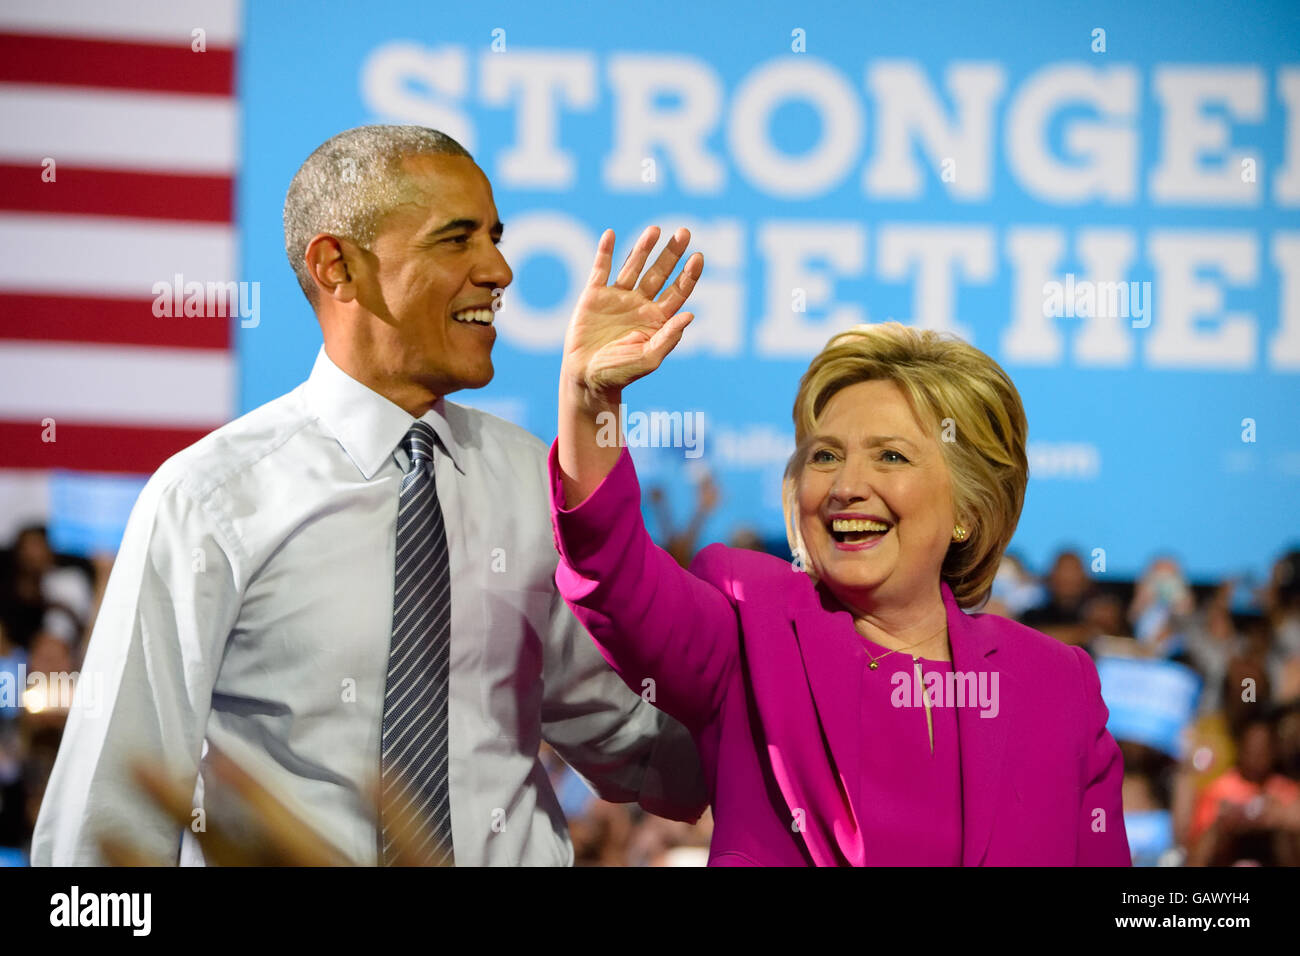 Charlotte, NC, USA. 5th July, 2016. US President Barack Obama stands on stage looking to the left with presumptive Democratic presidential nominee, Hillary Clinton, right, during their first joint campaign appearence. The event was held at the Charlotte Convention Center. Credit:  Evan El-Amin/Alamy Live News Stock Photo